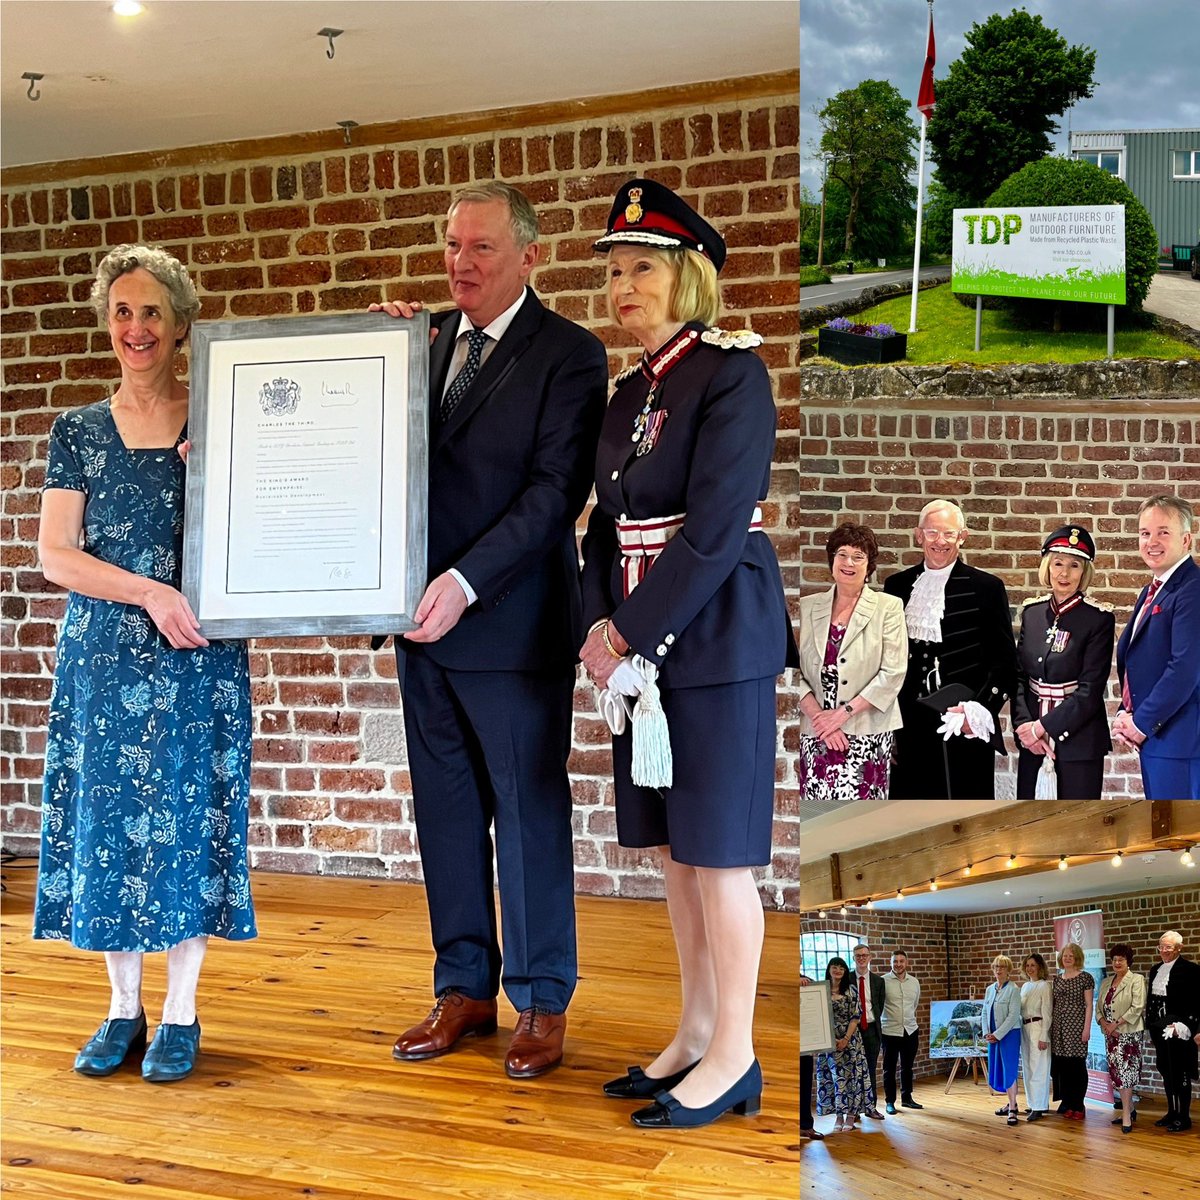 TDP Furniture of Wirksworth prevent 4,500 tonnes of plastic waste going into landfill and polluting waterways. Worthy winners of the Kings Award presented today by HM Lord Lieutenant. Proud to be there and meet their passionate MD Rob Barlow and his committed team. @LLDerbyshire